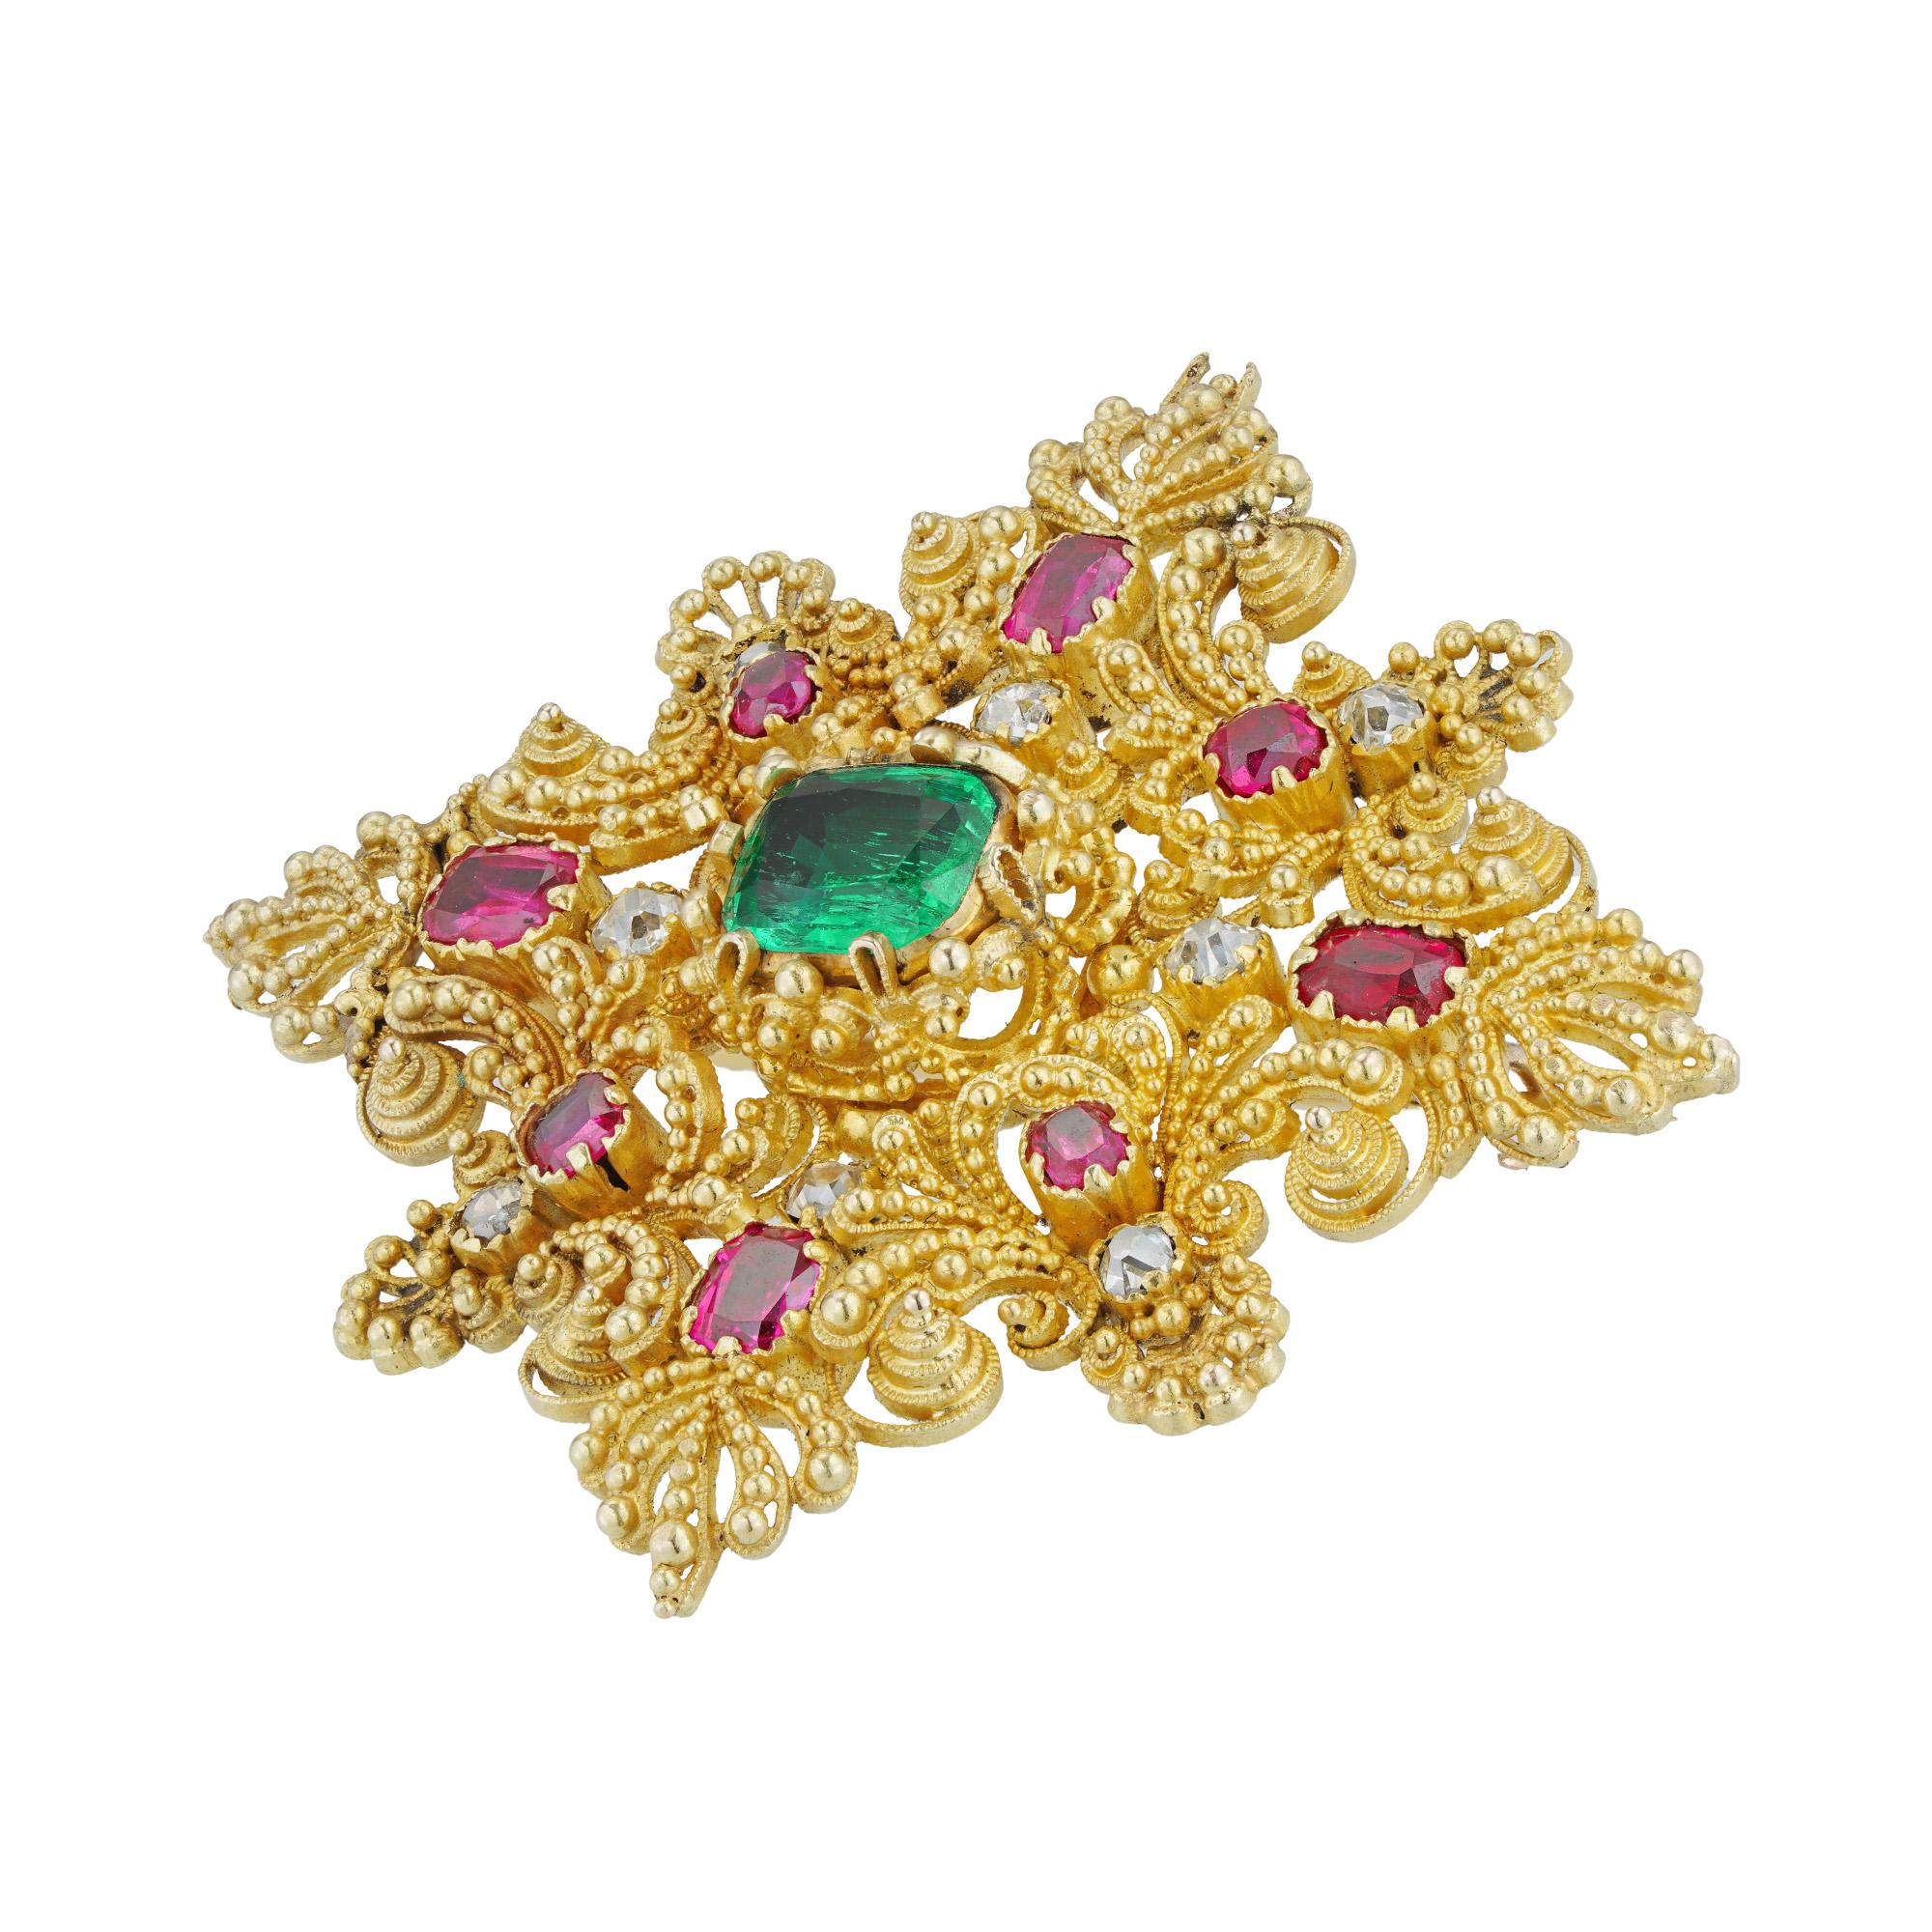 A Regency cannetille gem-set cross brooch, to the centre a rectangular-cut emerald estimated to weigh 0.9 carats, surrounded by eight rectangular-cut rubies and eight old mine-cut diamonds, the rubies estimated to weigh 0.6 carats in total and the